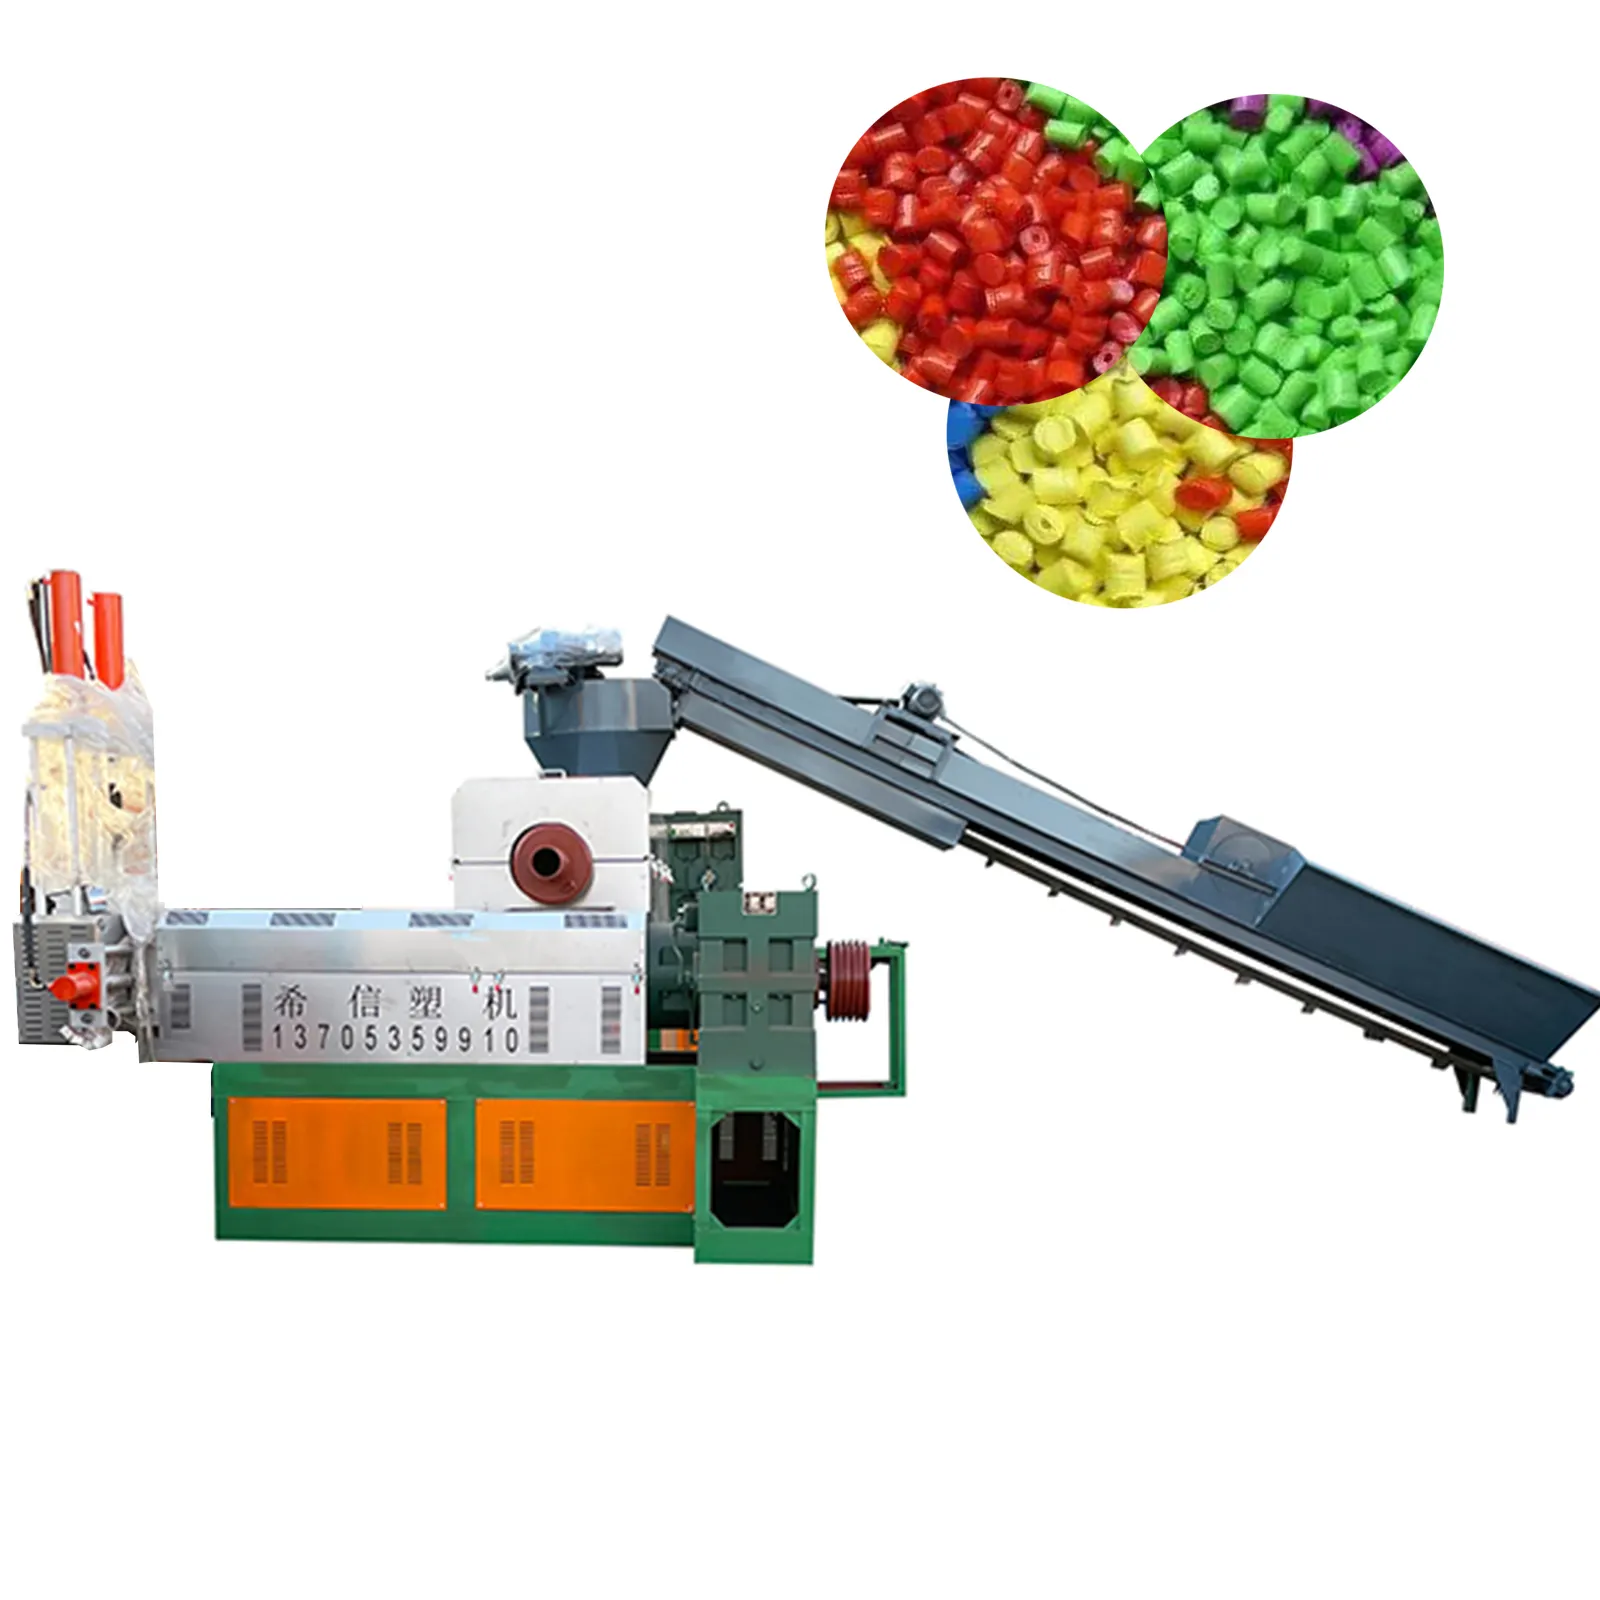 Ldpe Hdpe Pp Recycle Plastic recycle extruder pelletizer machine/ plastic granules making machine/ recycling granulating machine